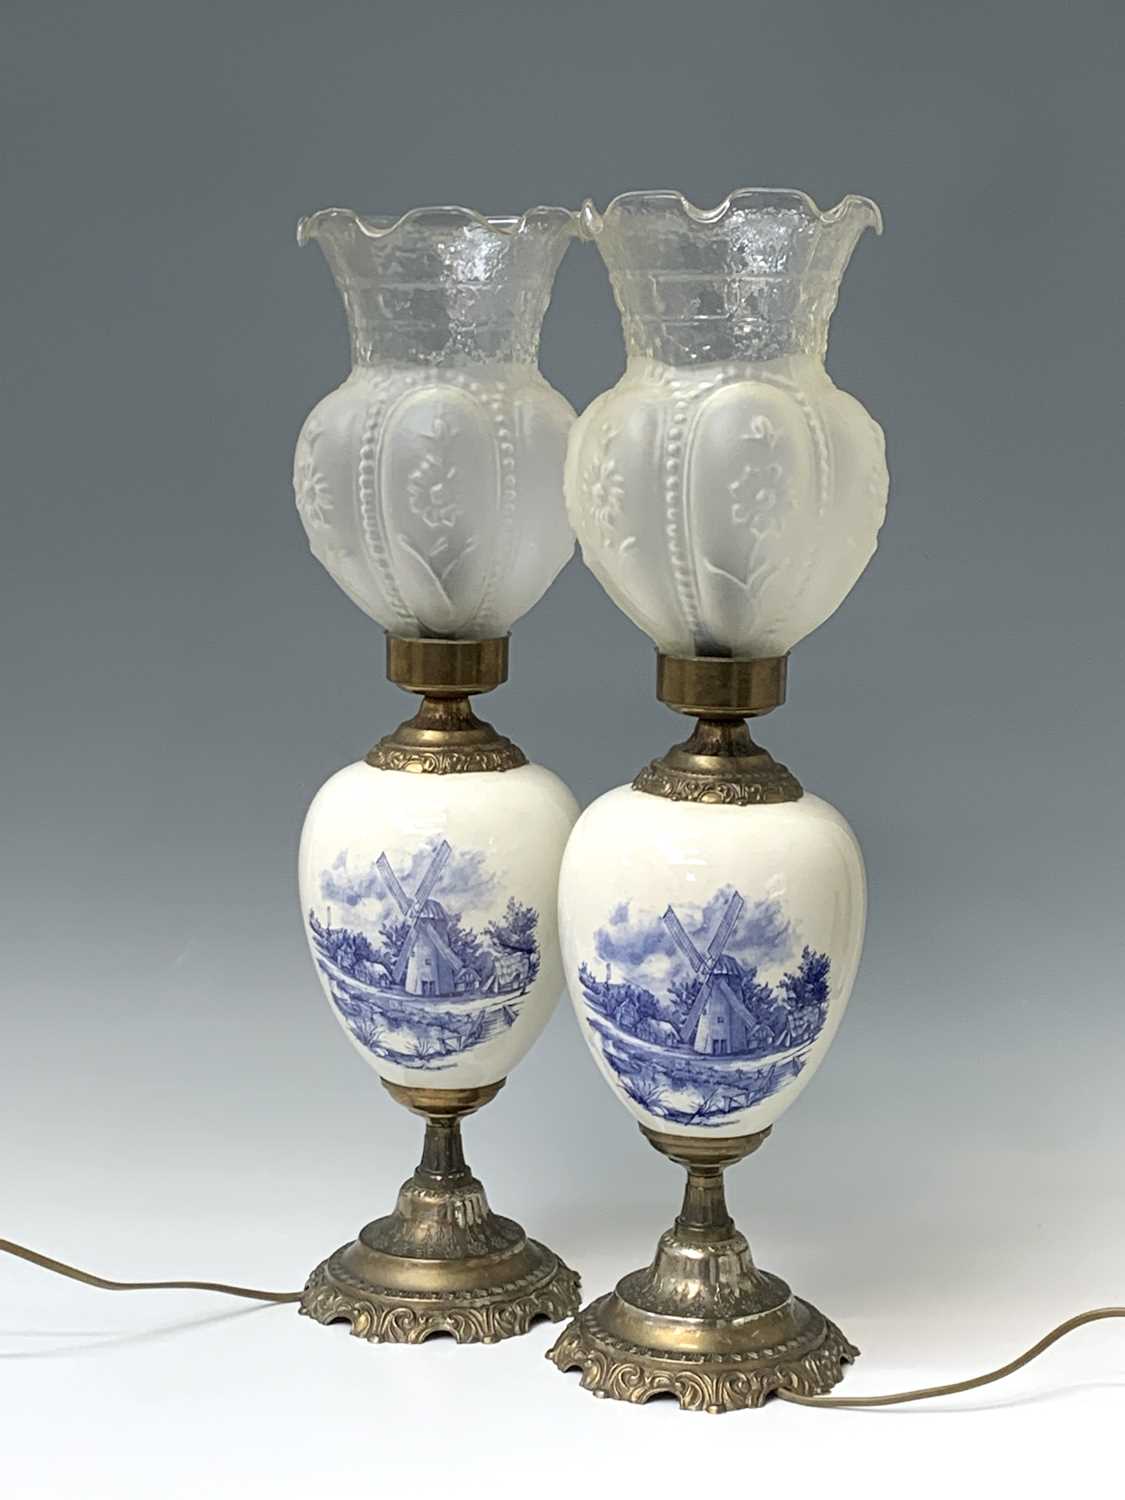 A pair of 20th century gilt metal mounted Delft table lamps with glass shades. Height 60.5cm.